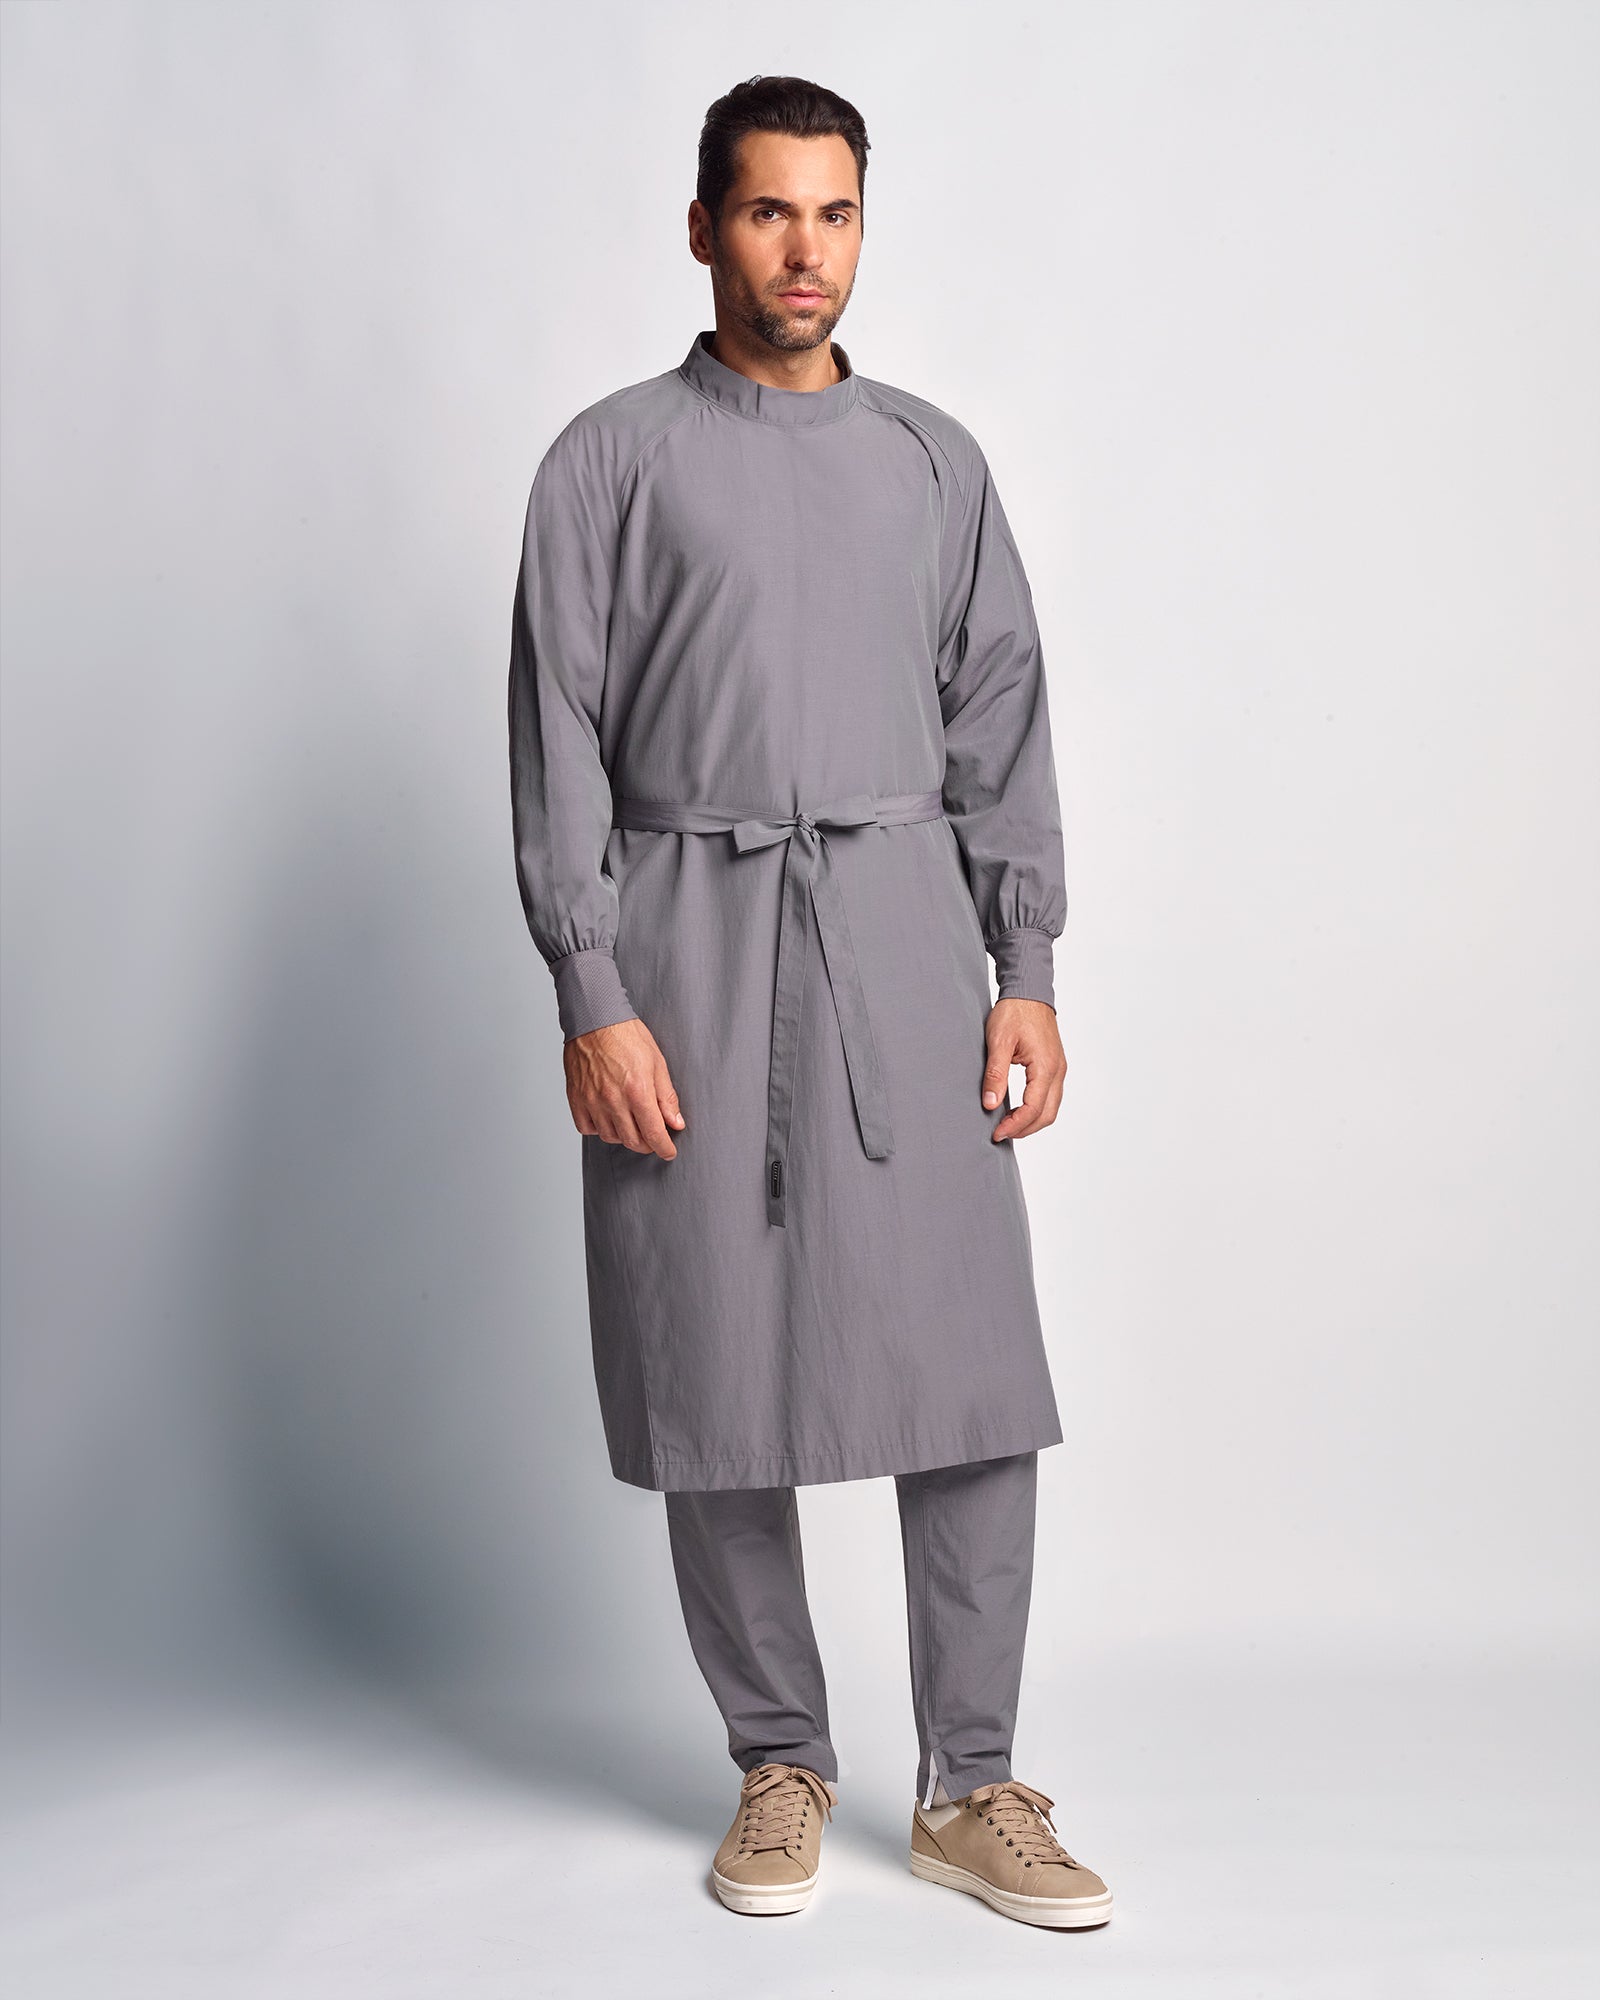 Unisex Protection Gown